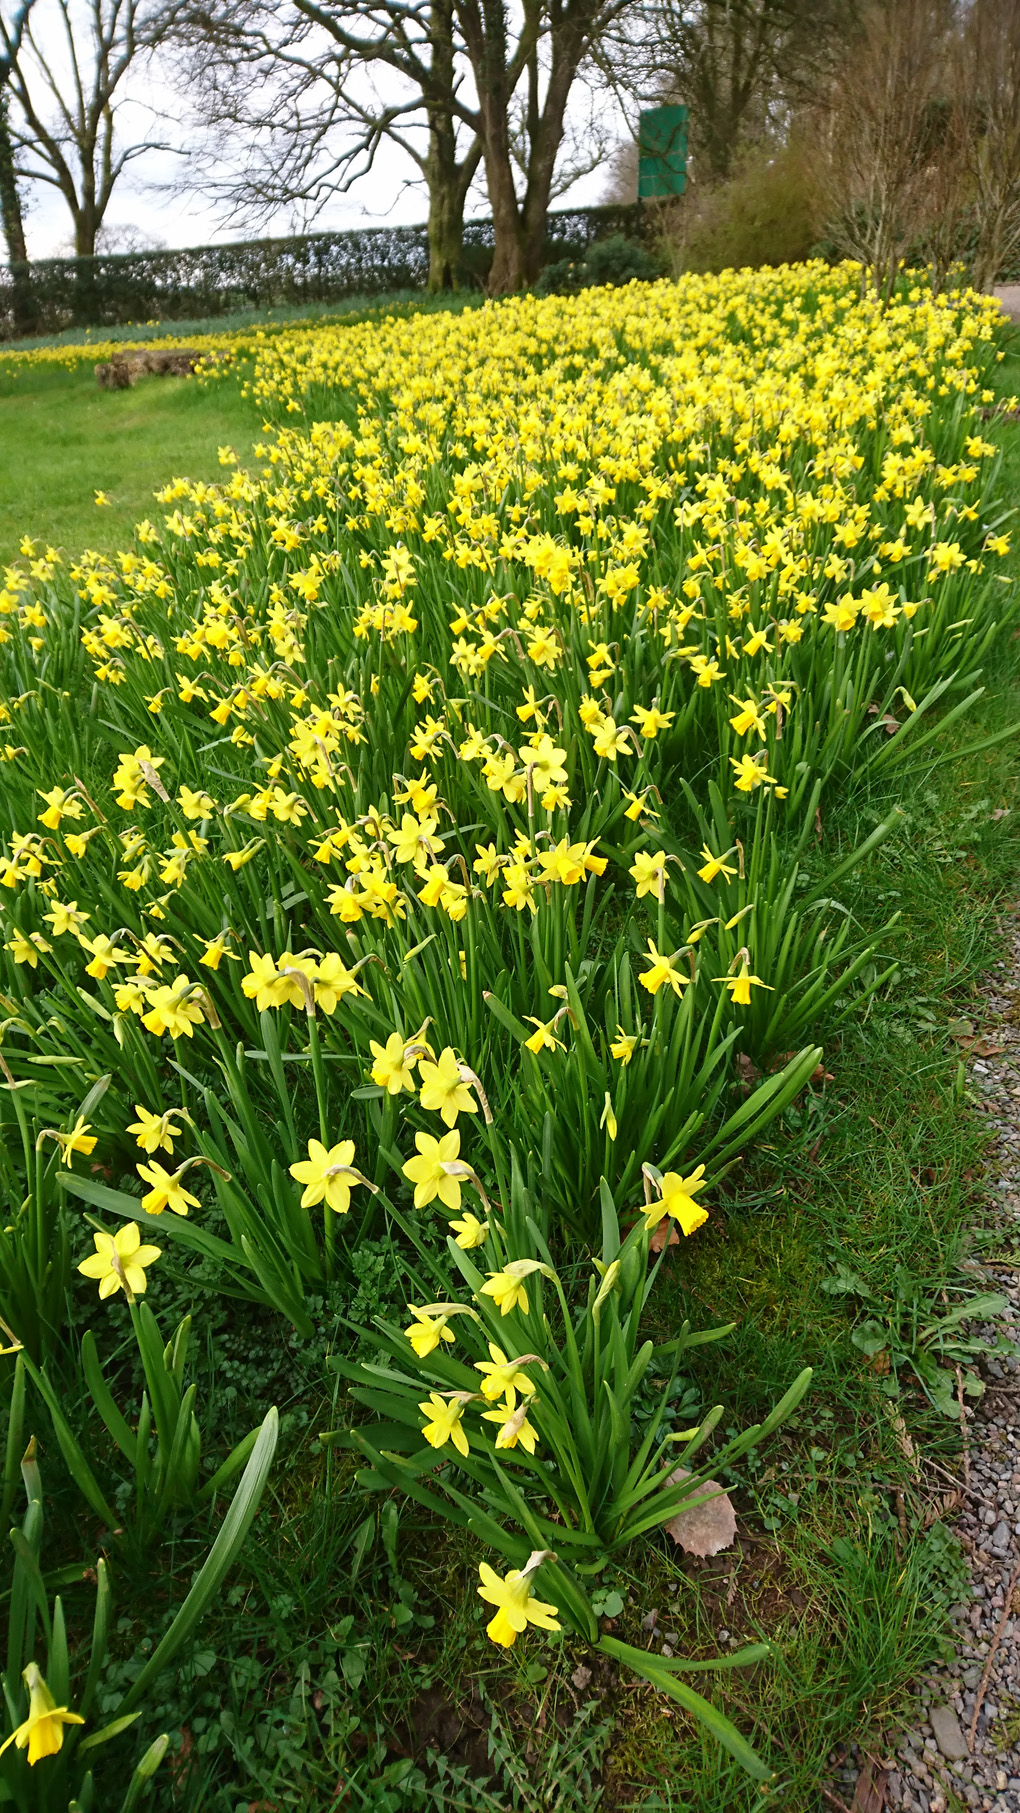 Image shows a windy path skirting a large lawn flanked by a whole host of Tete a Tete Daffodils, looking glorious in the bright sunshine - a rare sight these days!